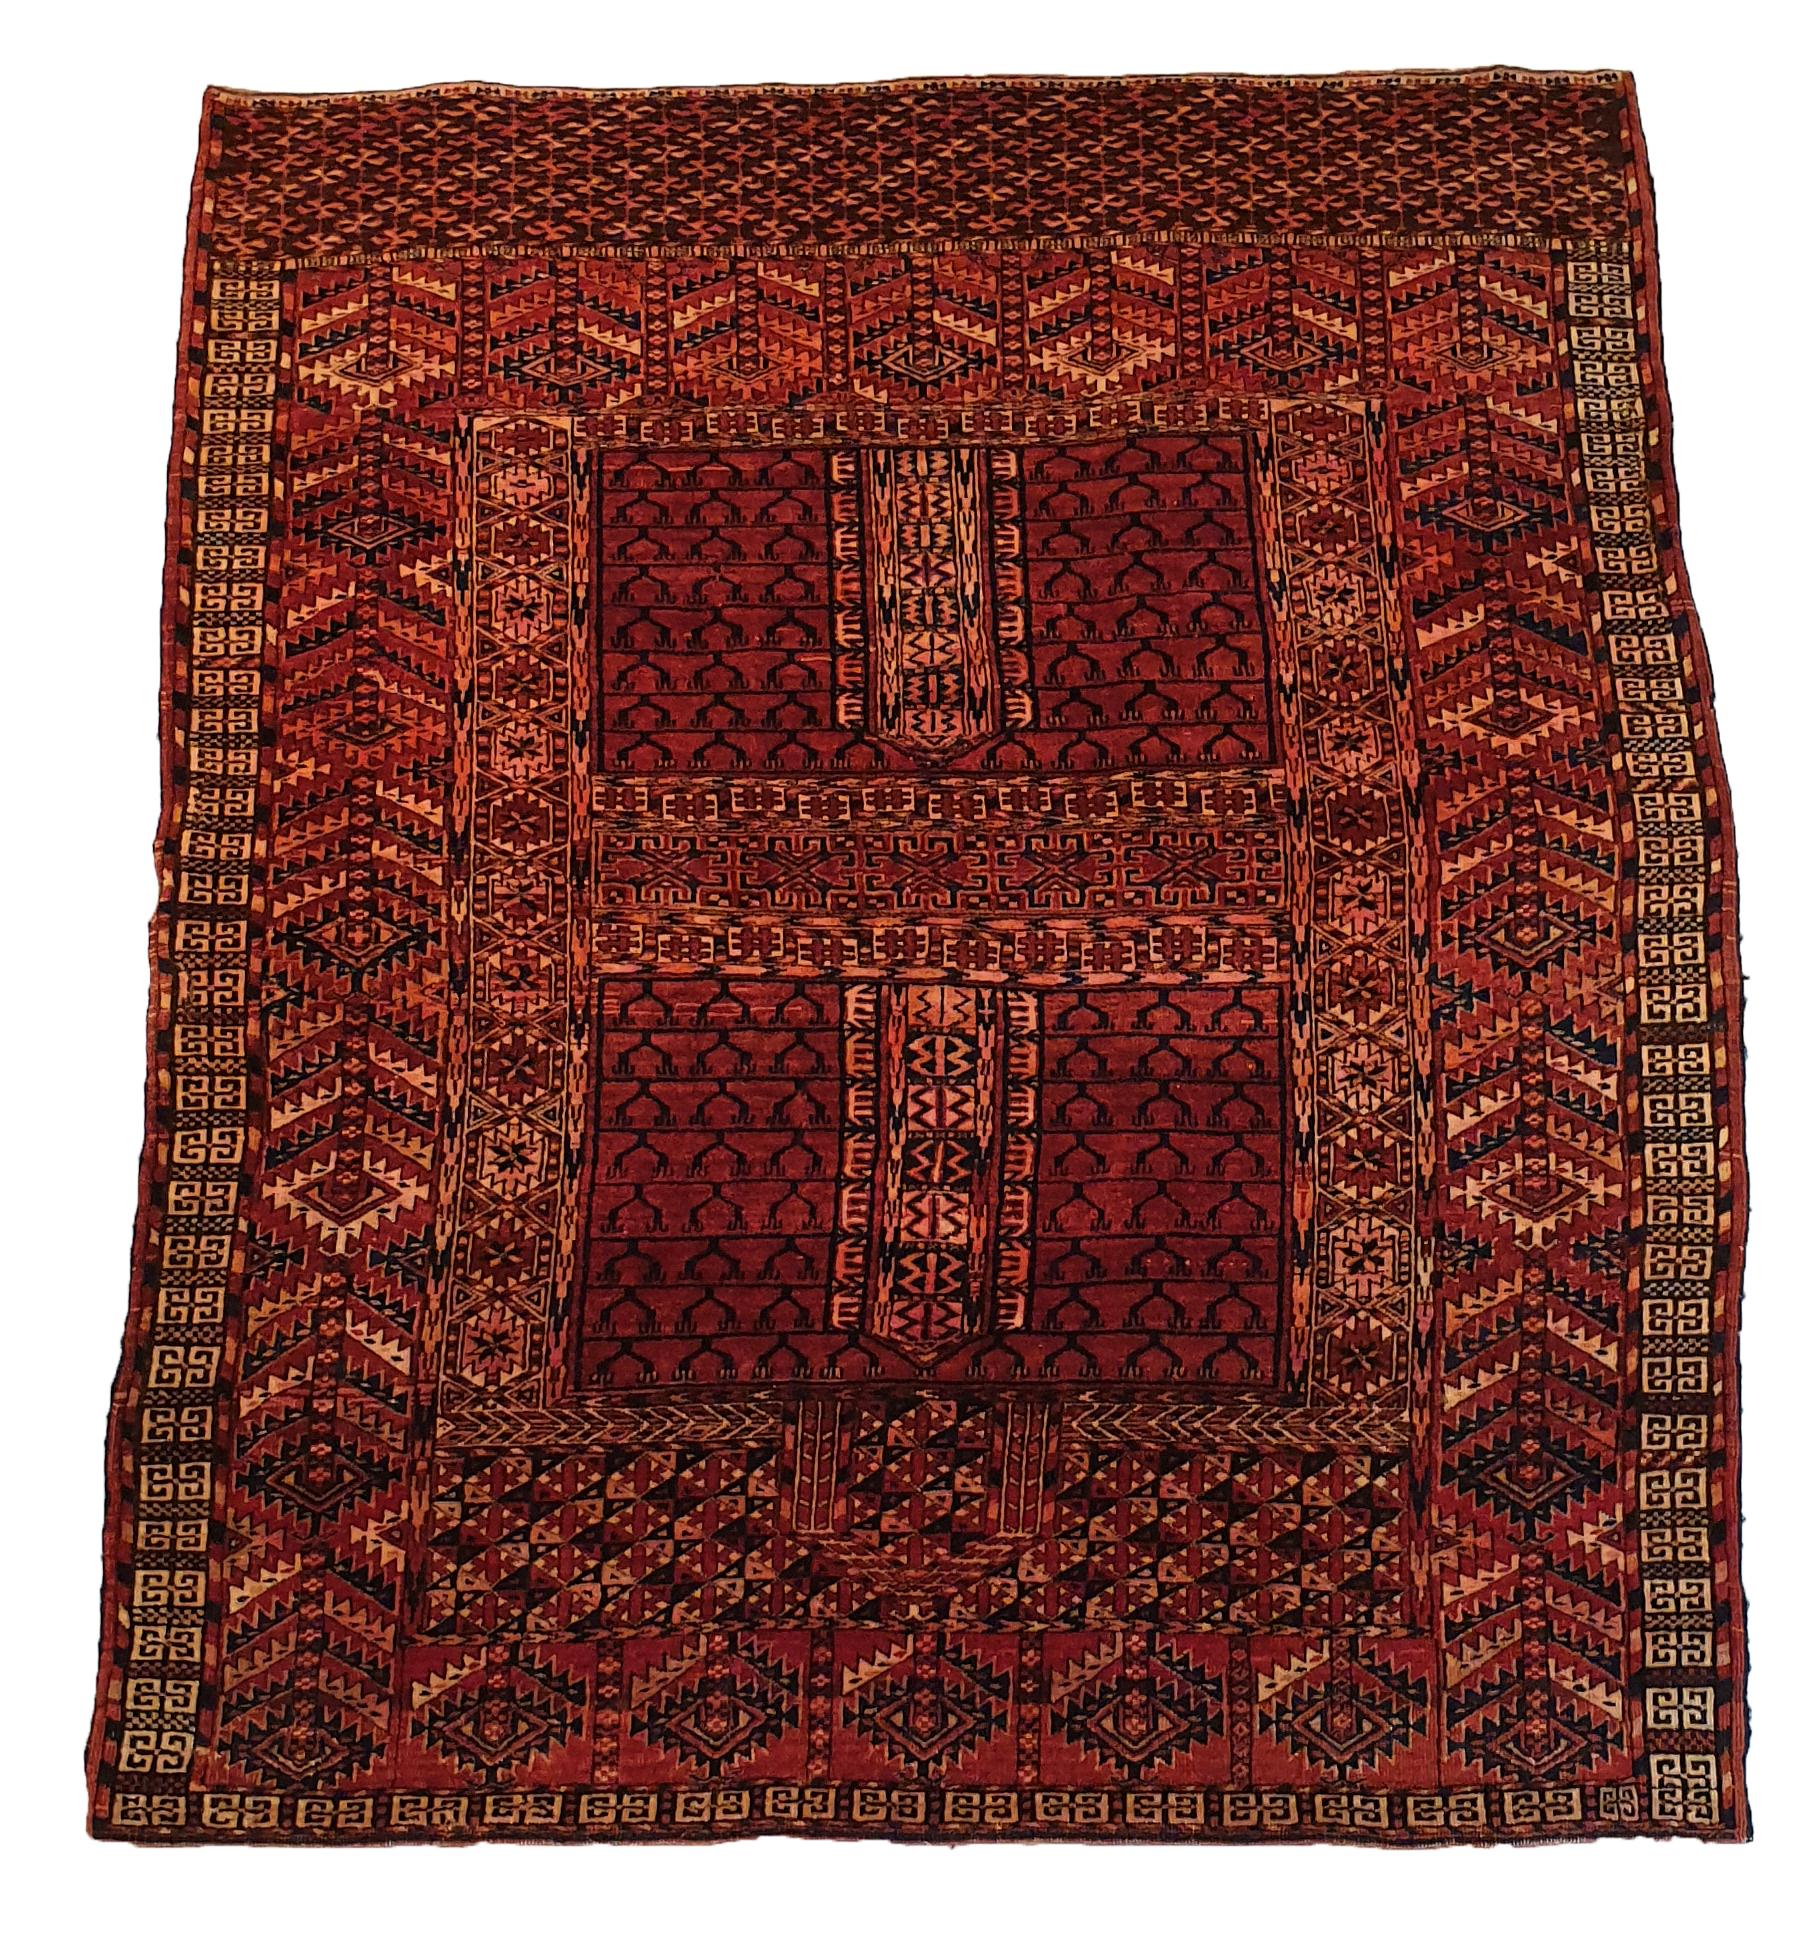 862 - Beautiful Turkmen carpet (Hatchlou) from the end of the 19th century with a geometric and tribal design and pretty natural colors, entirely and finely hand knotted with wool pile on a wool background.